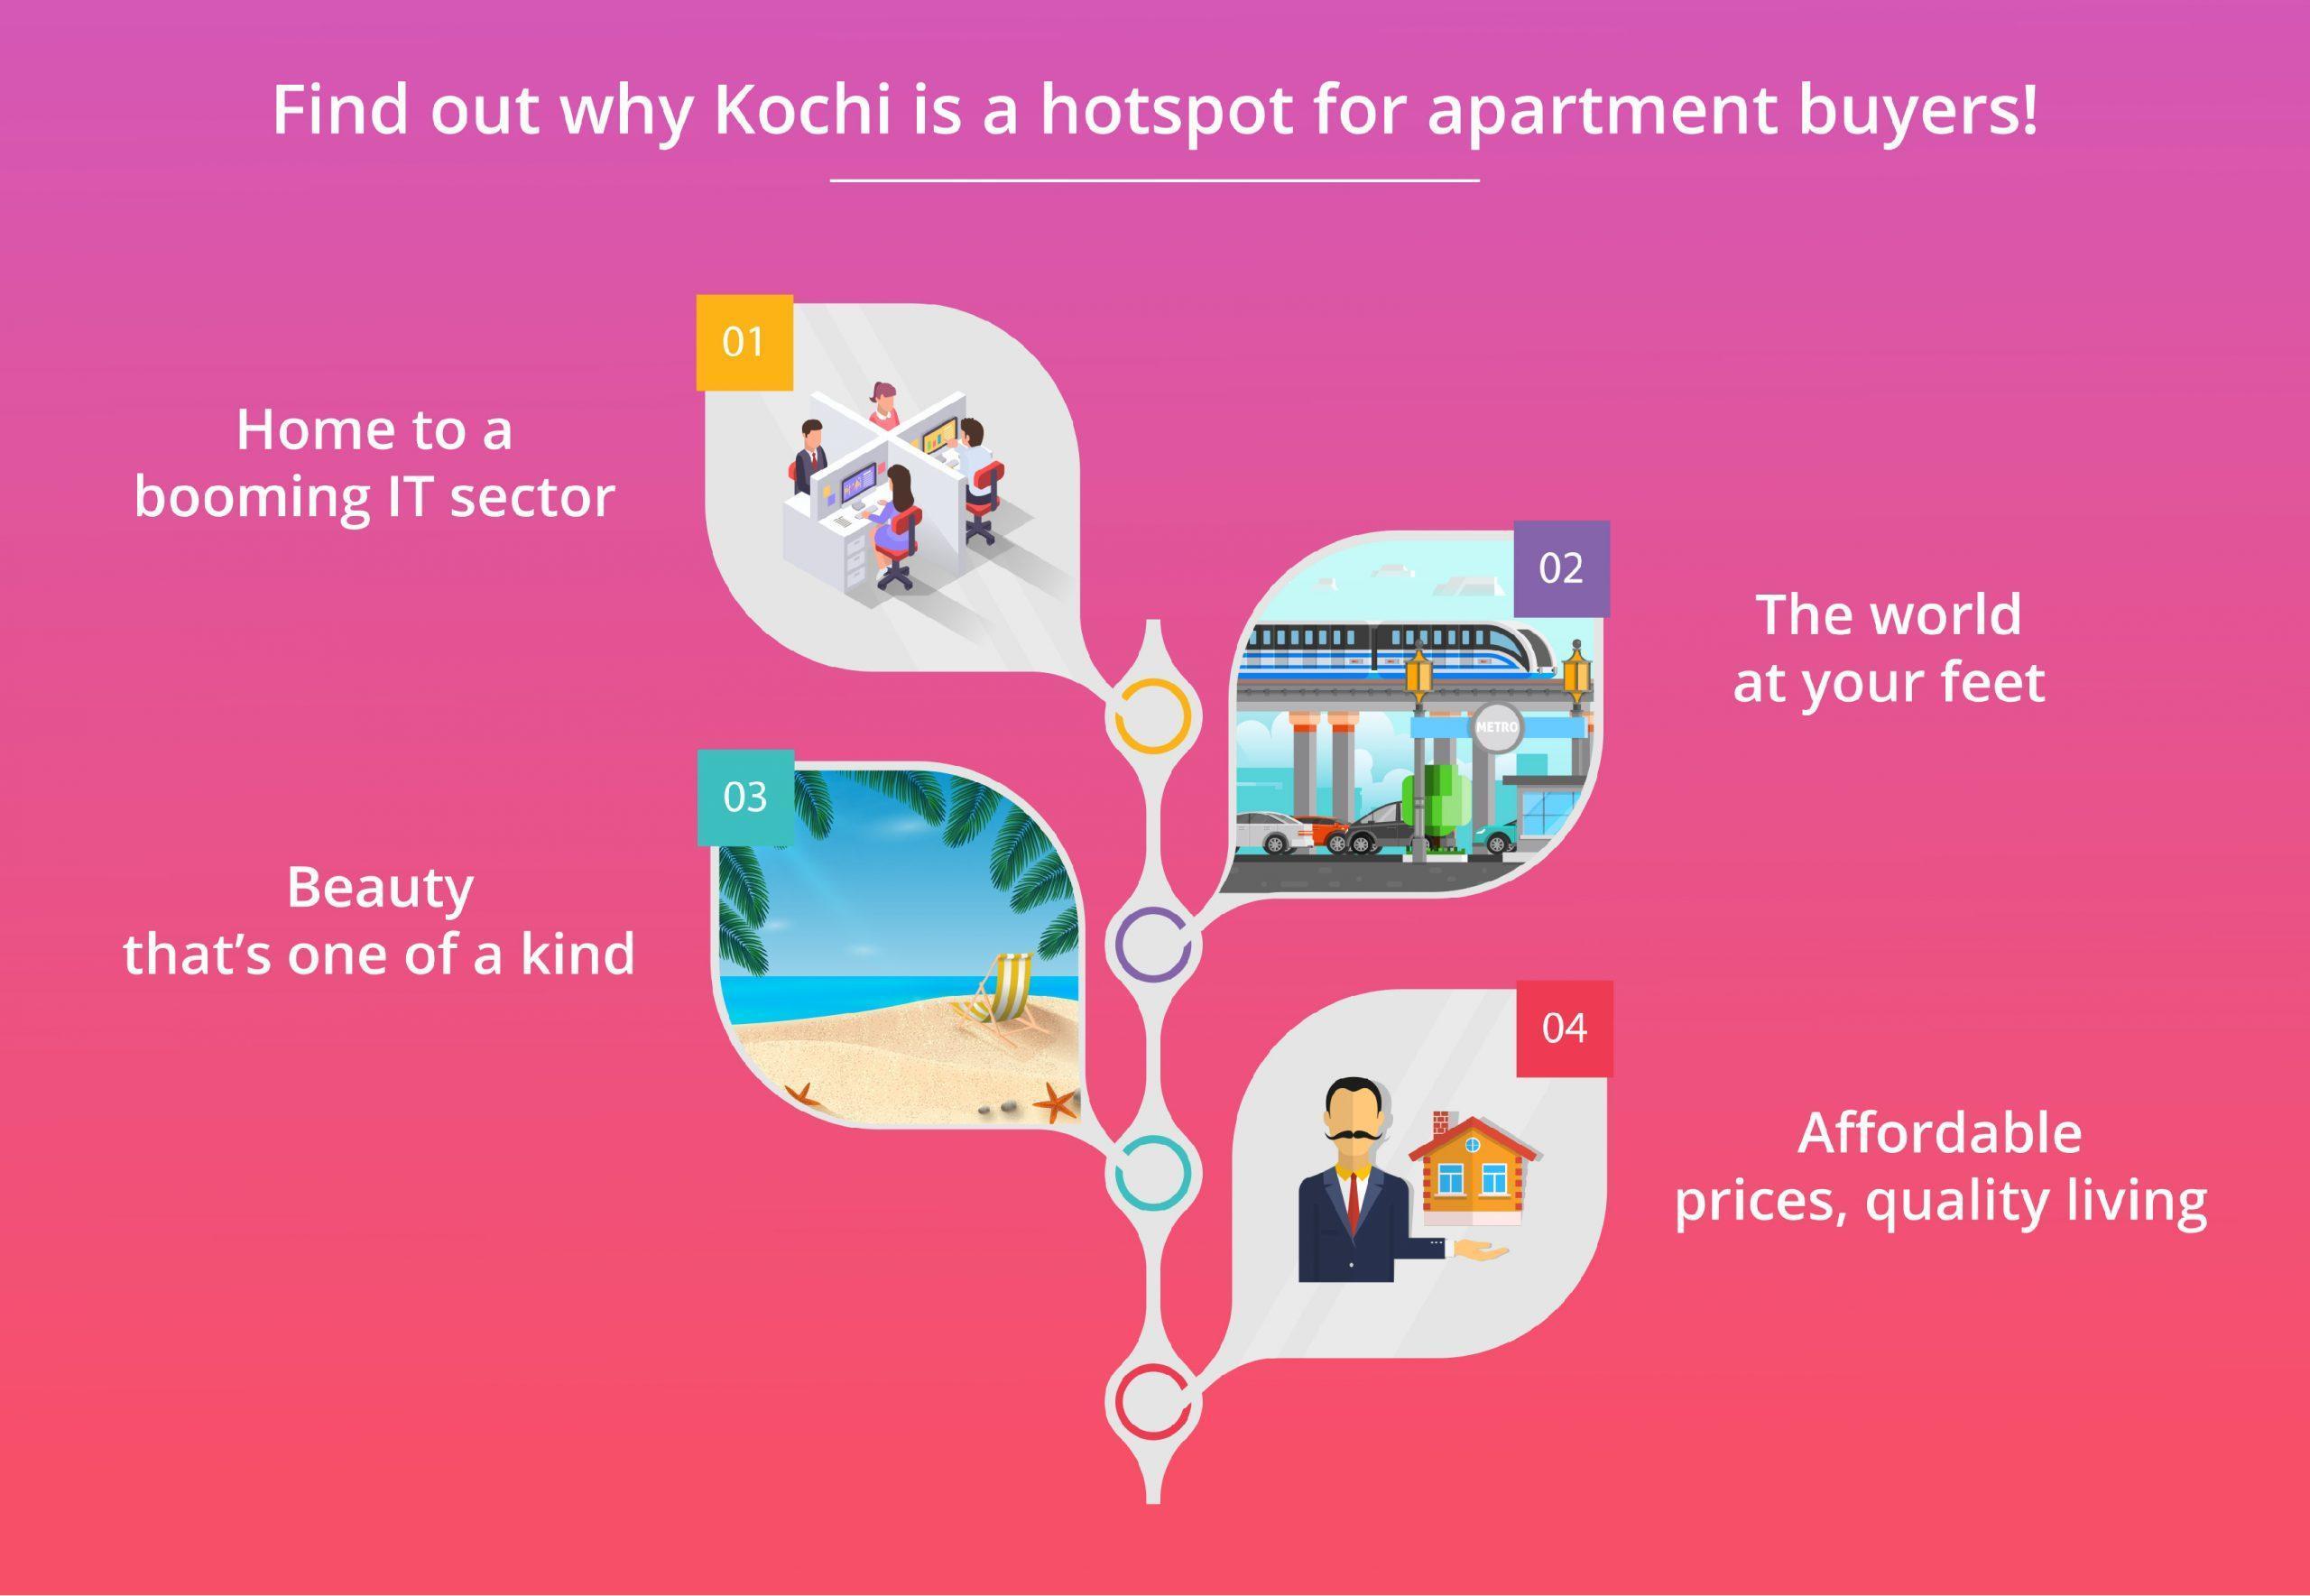 Find out why Kochi is a hotspot for apartment buyers!